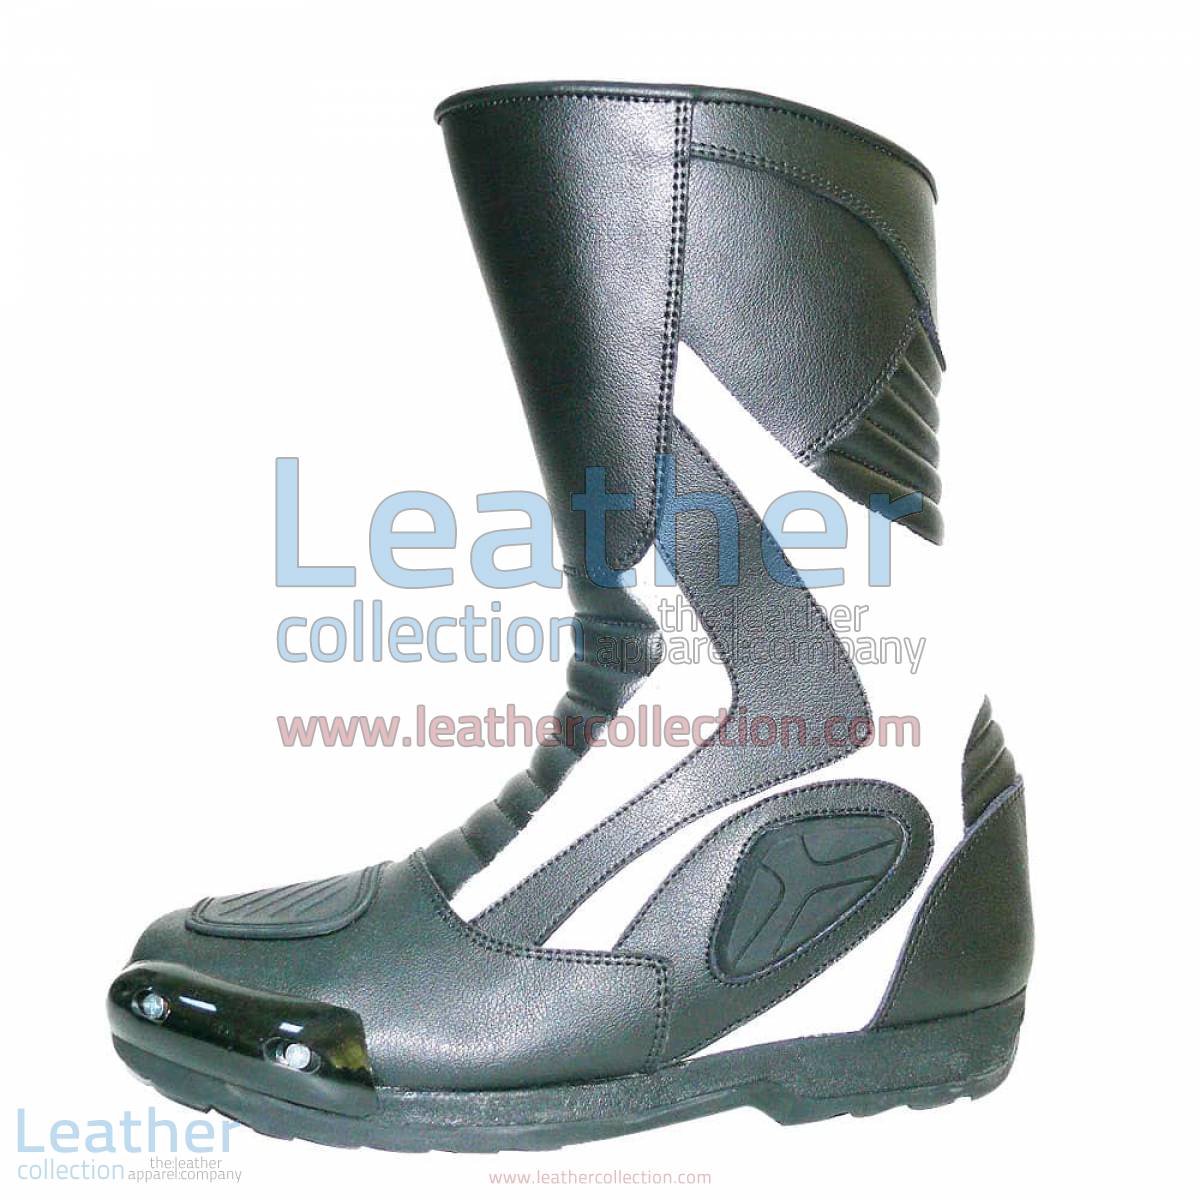 Heritage White Leather Racing Boots | heritage boots,racing boots